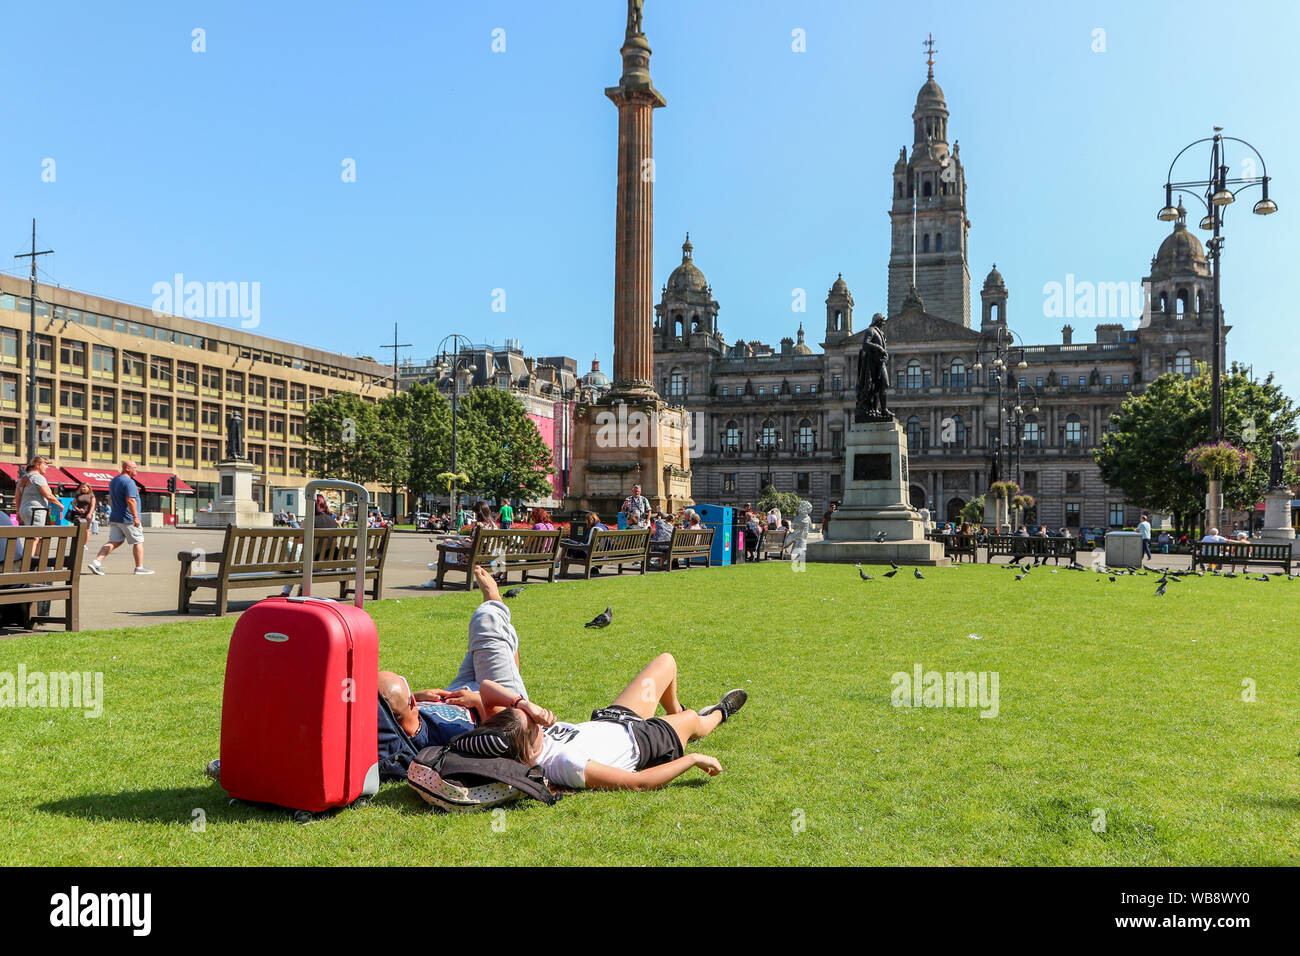 Glasgow, Scotland, UK. 25 August 2019. As temperatures soar to over 26C in Glasgow after days of rain and cold wind, people flock to the city's open spaces of George Square and the Botanic Gardens to take advantage of late summer sun on this August Bank Holiday, to top up their tans and relax. Credit: Findlay/Alamy Live News Stock Photo